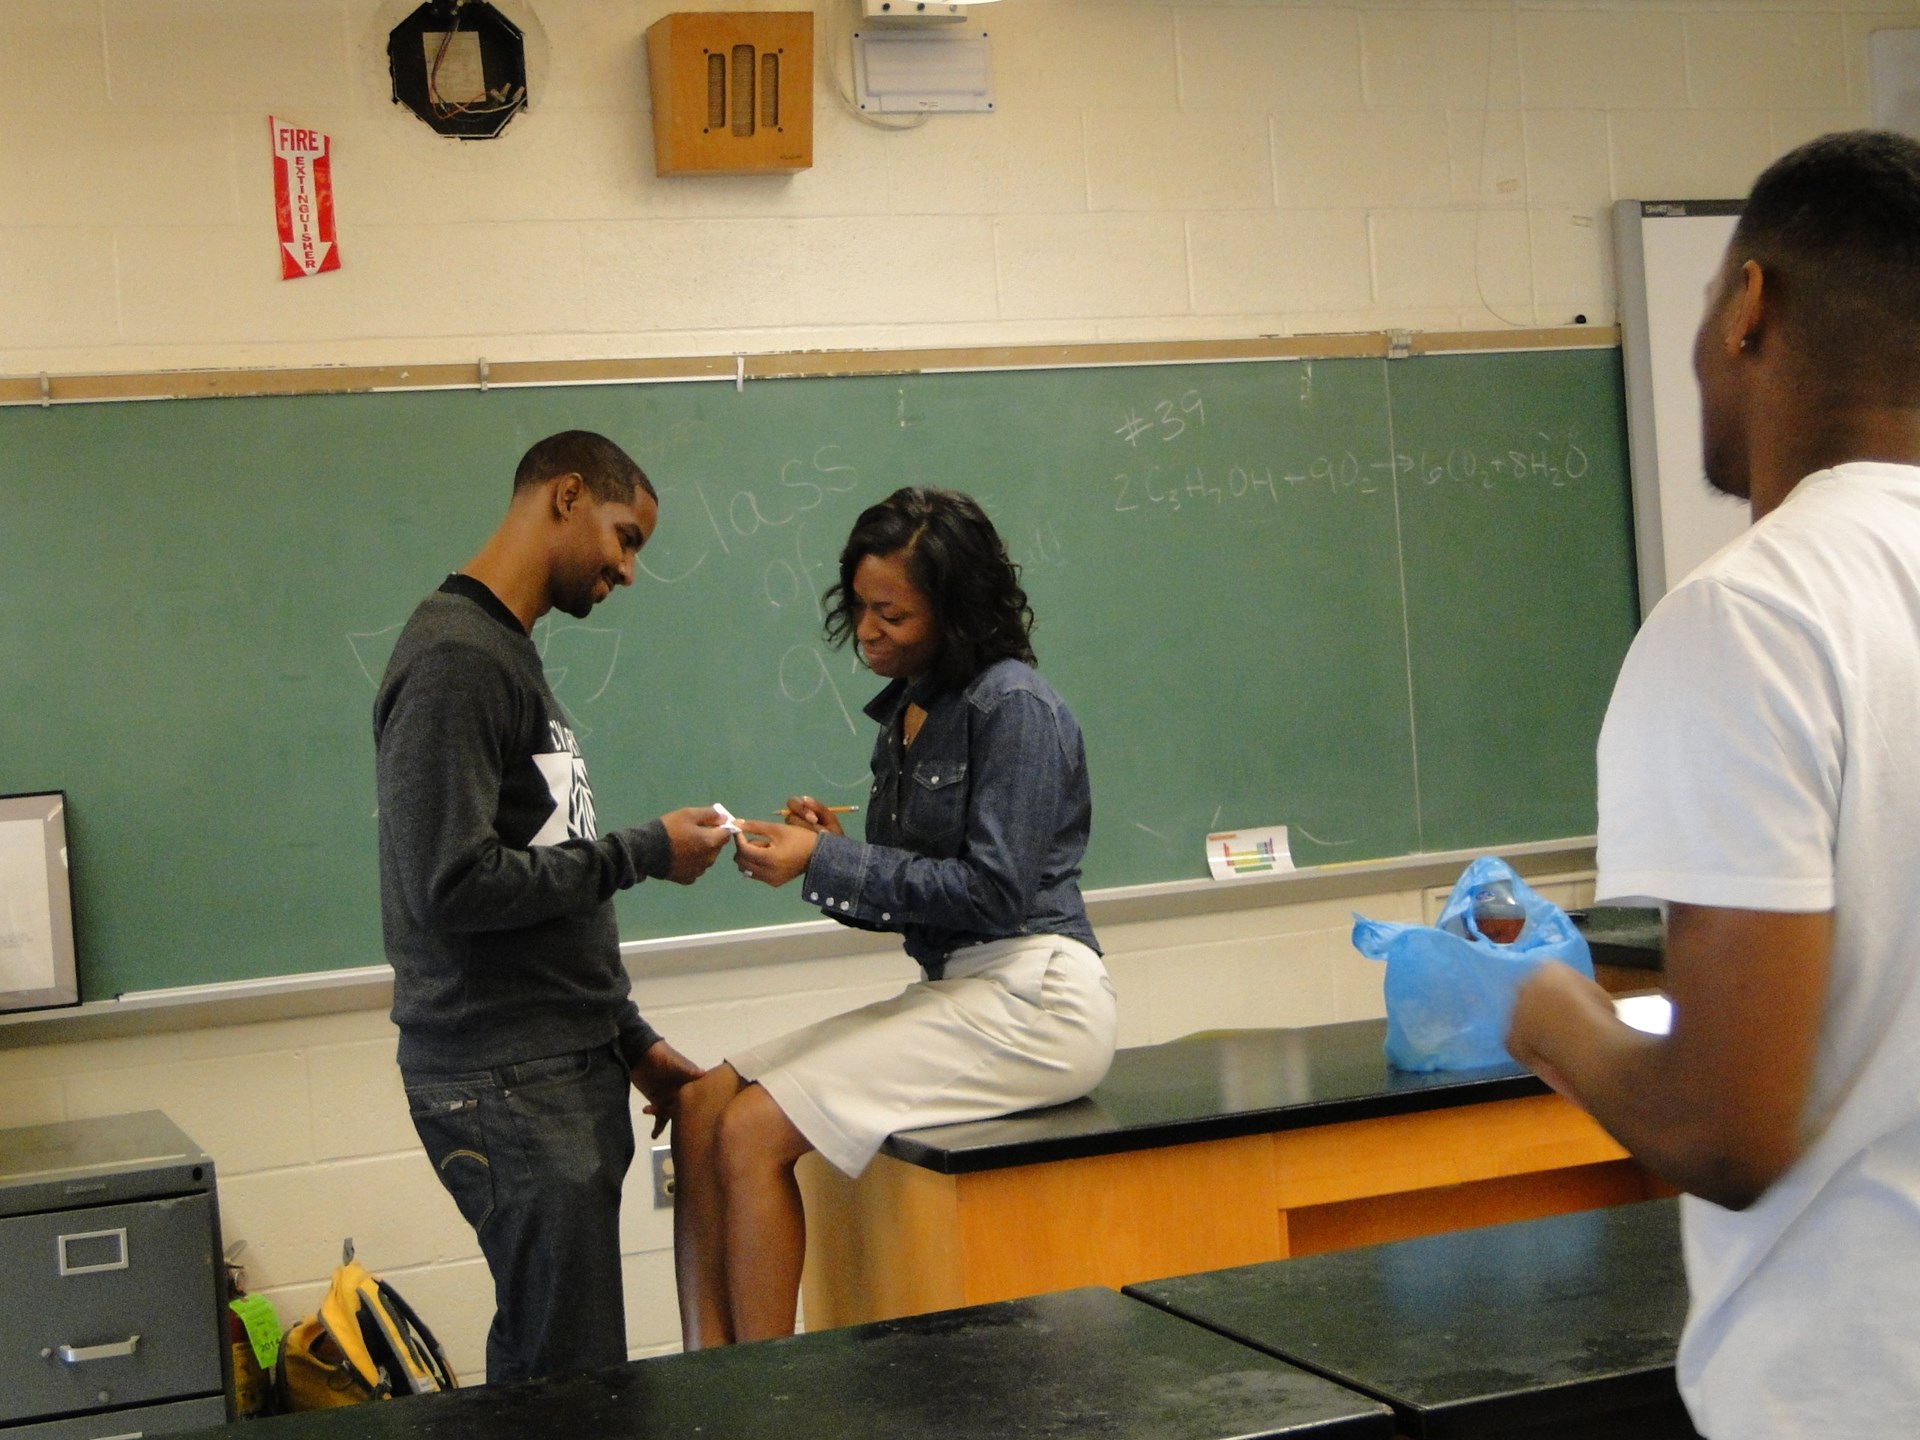 Roosevelt and Laeh reenacting the moment when he asked for her phone number in science class.